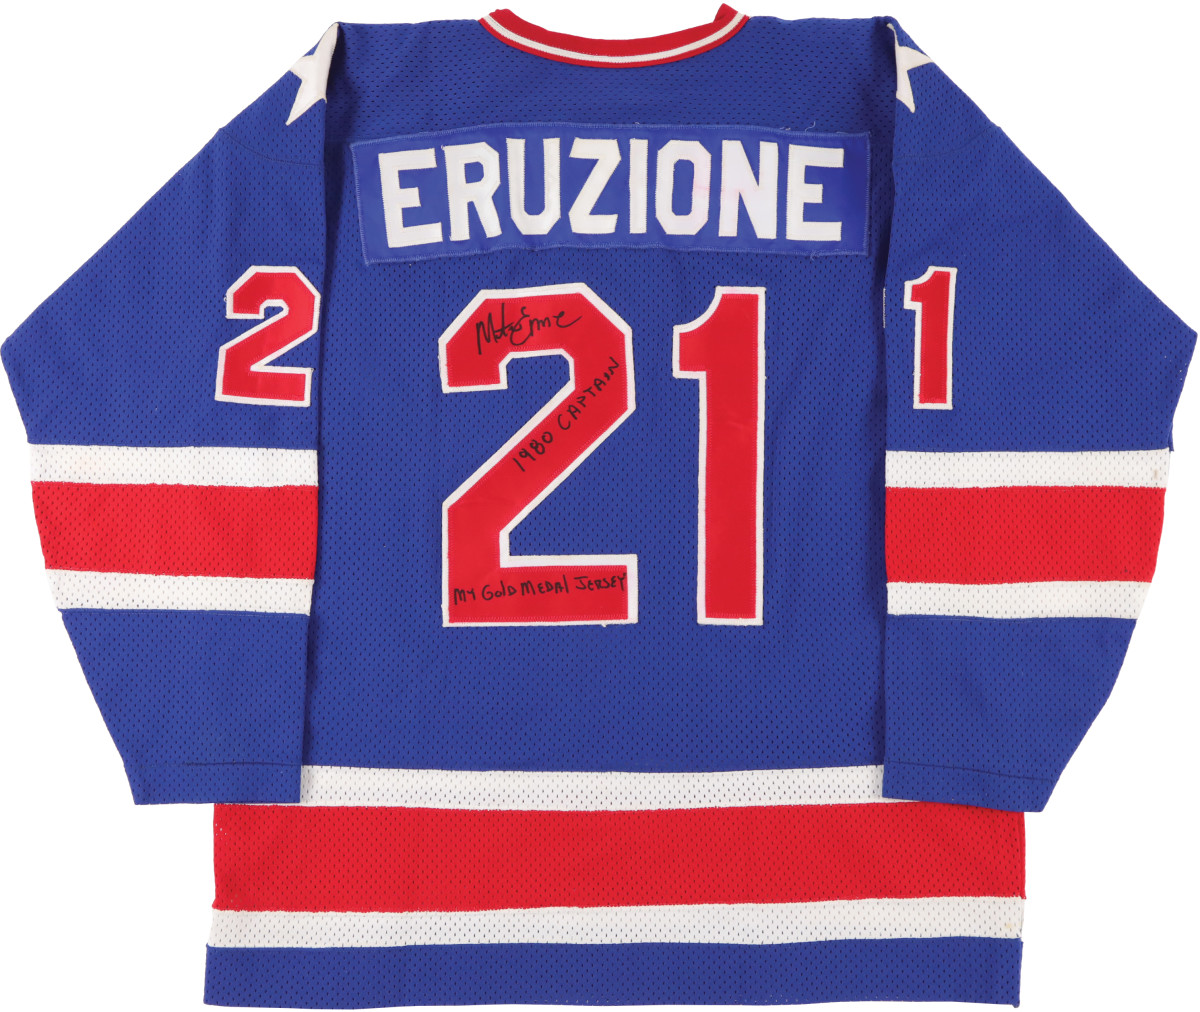 Mike Eruzione signed jersey from the 1980 Miracle on ice.